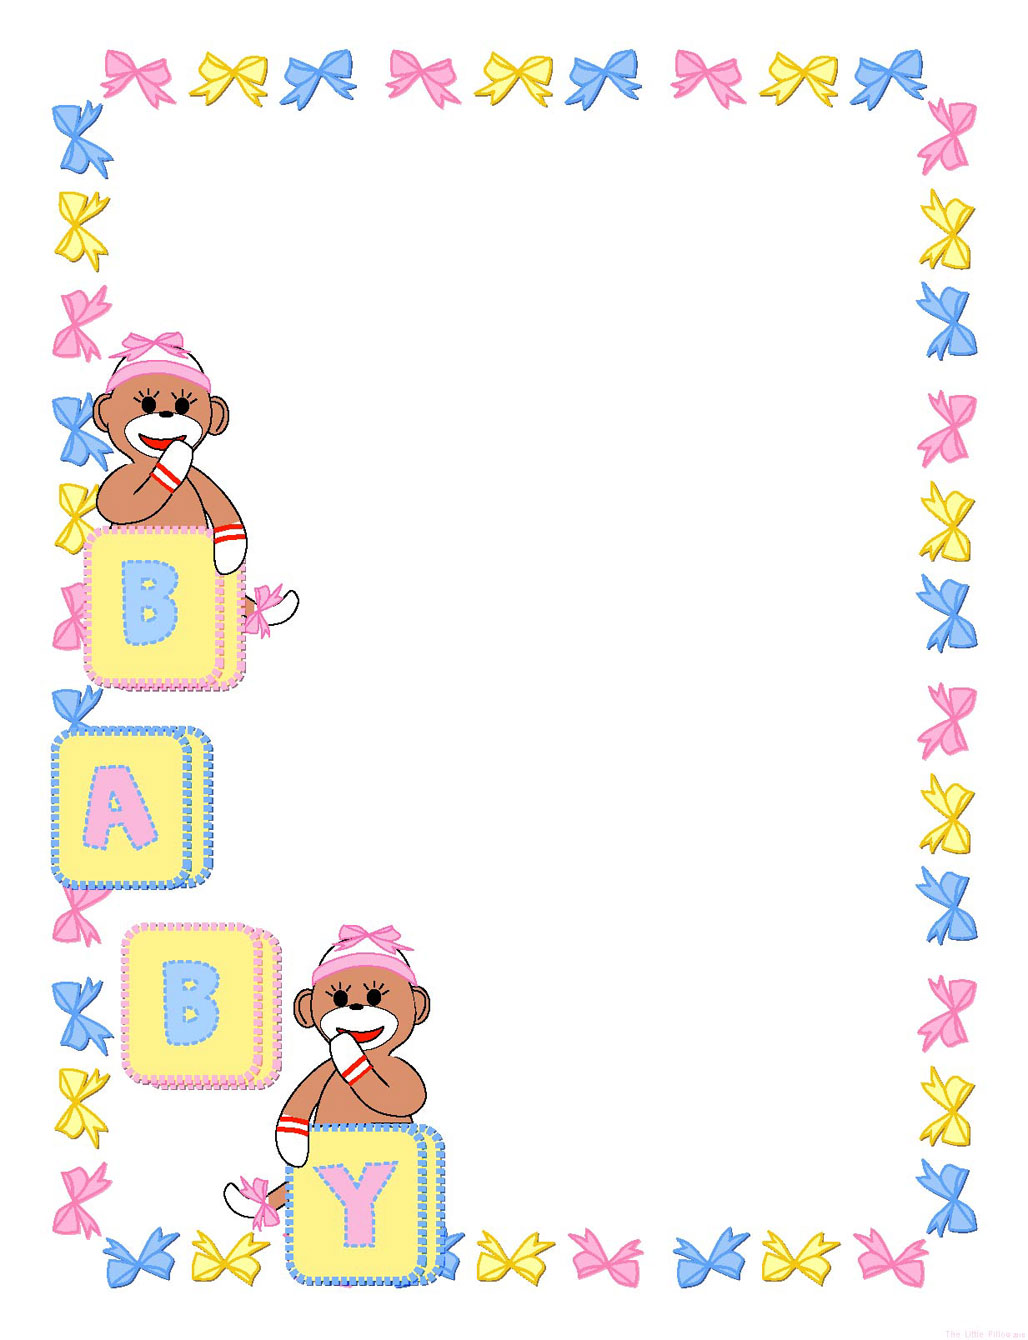 clipart-of-the-page-borders-for-baby-shower-free-image-download